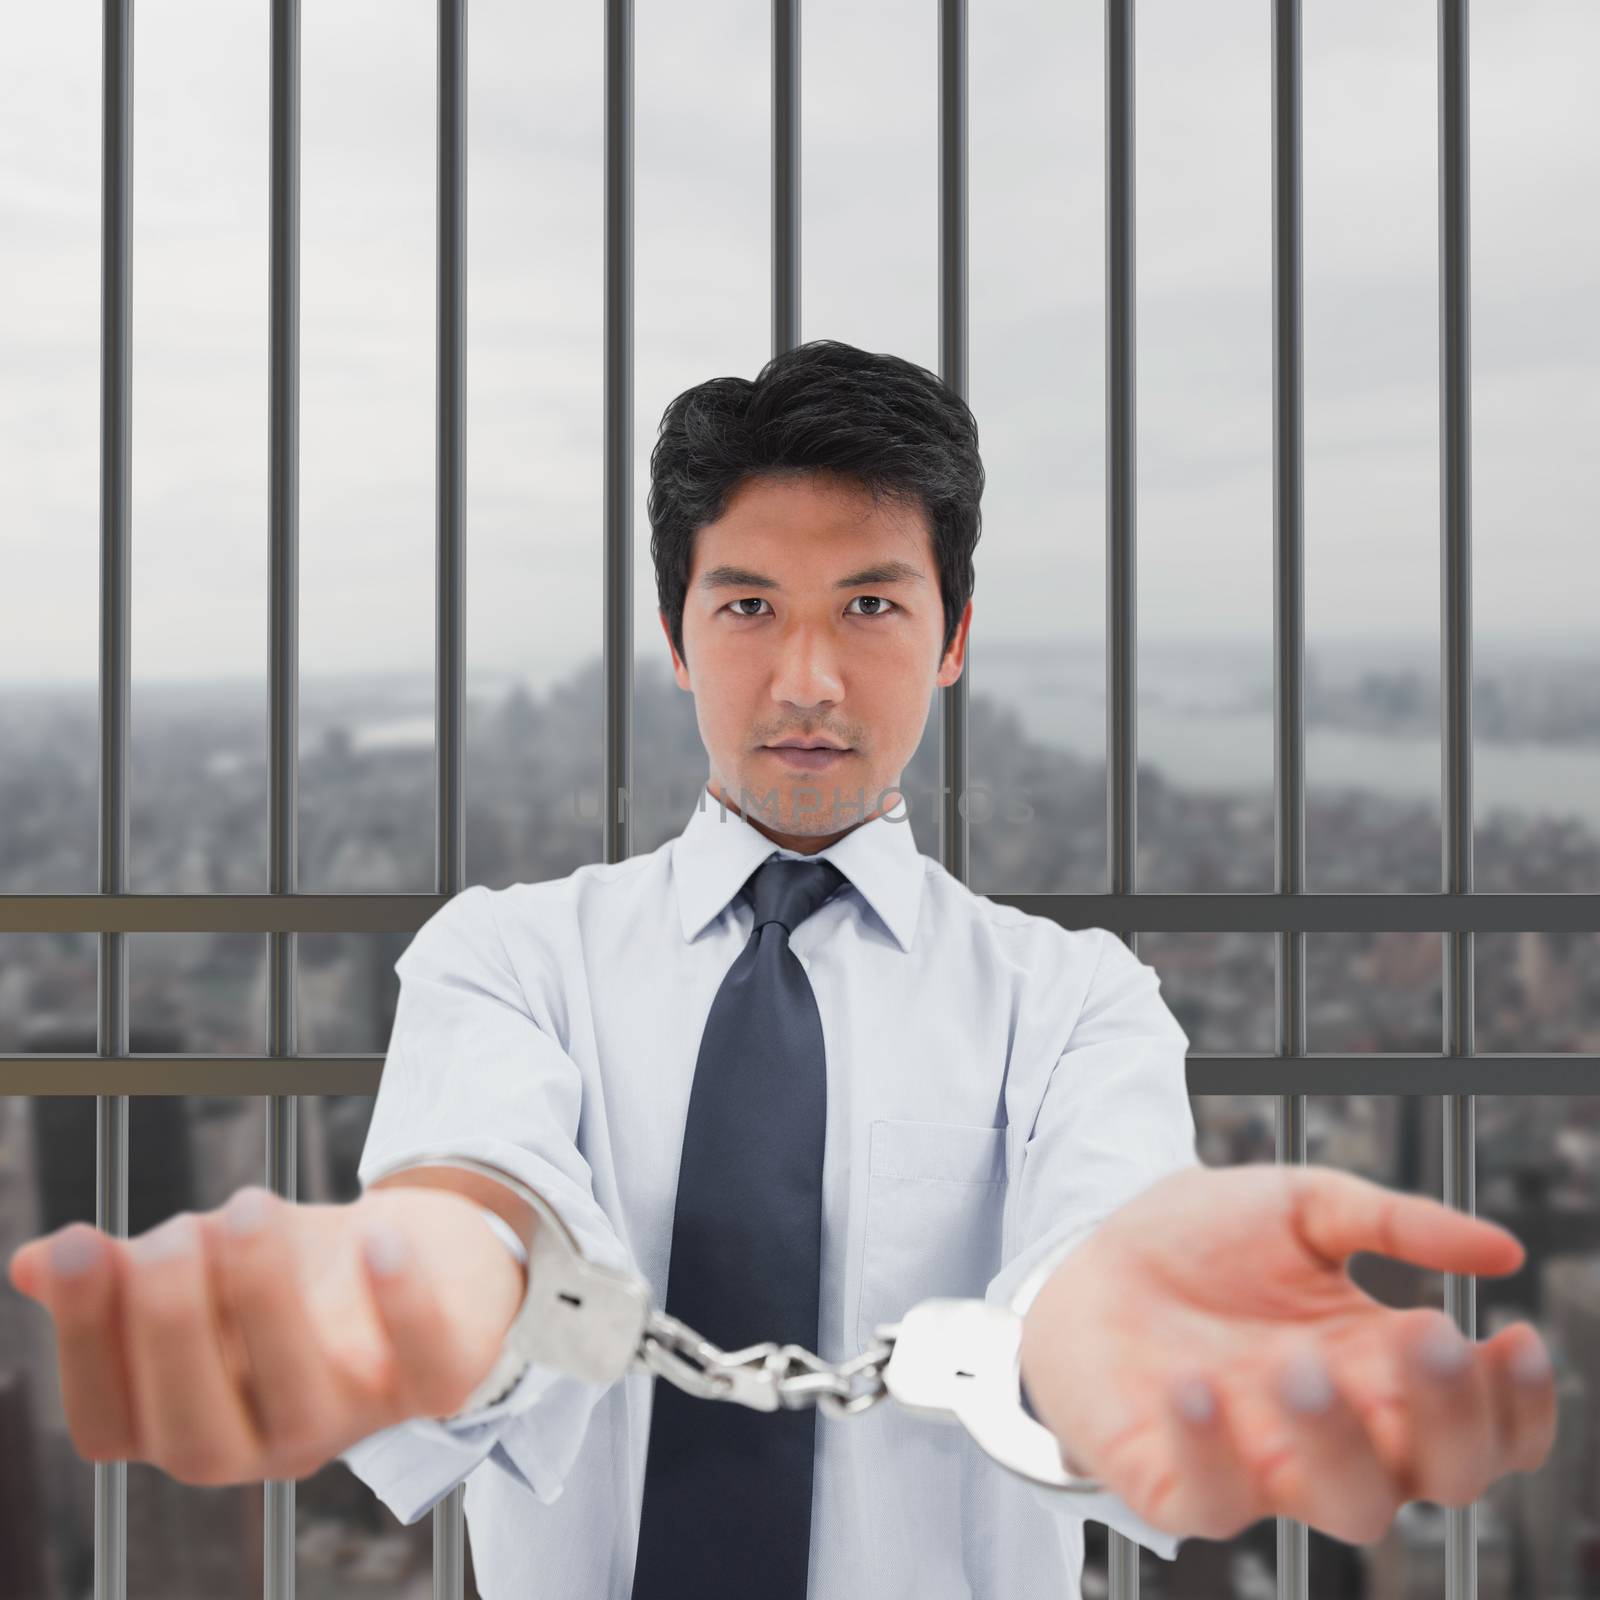 Businessman with handcuffs against new york